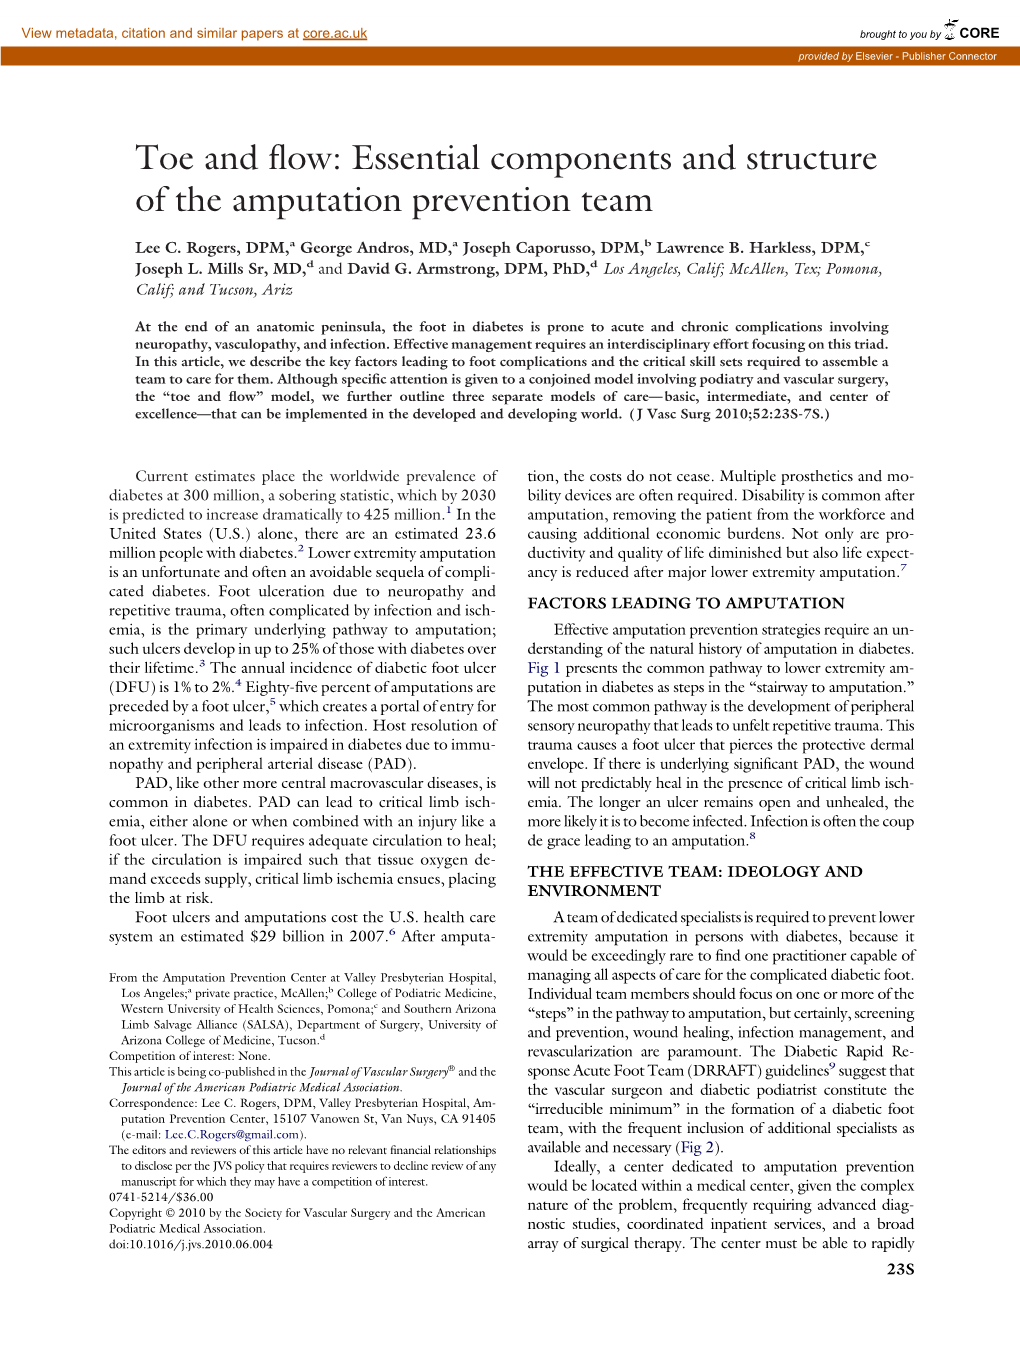 Toe and Flow: Essential Components and Structure of the Amputation Prevention Team